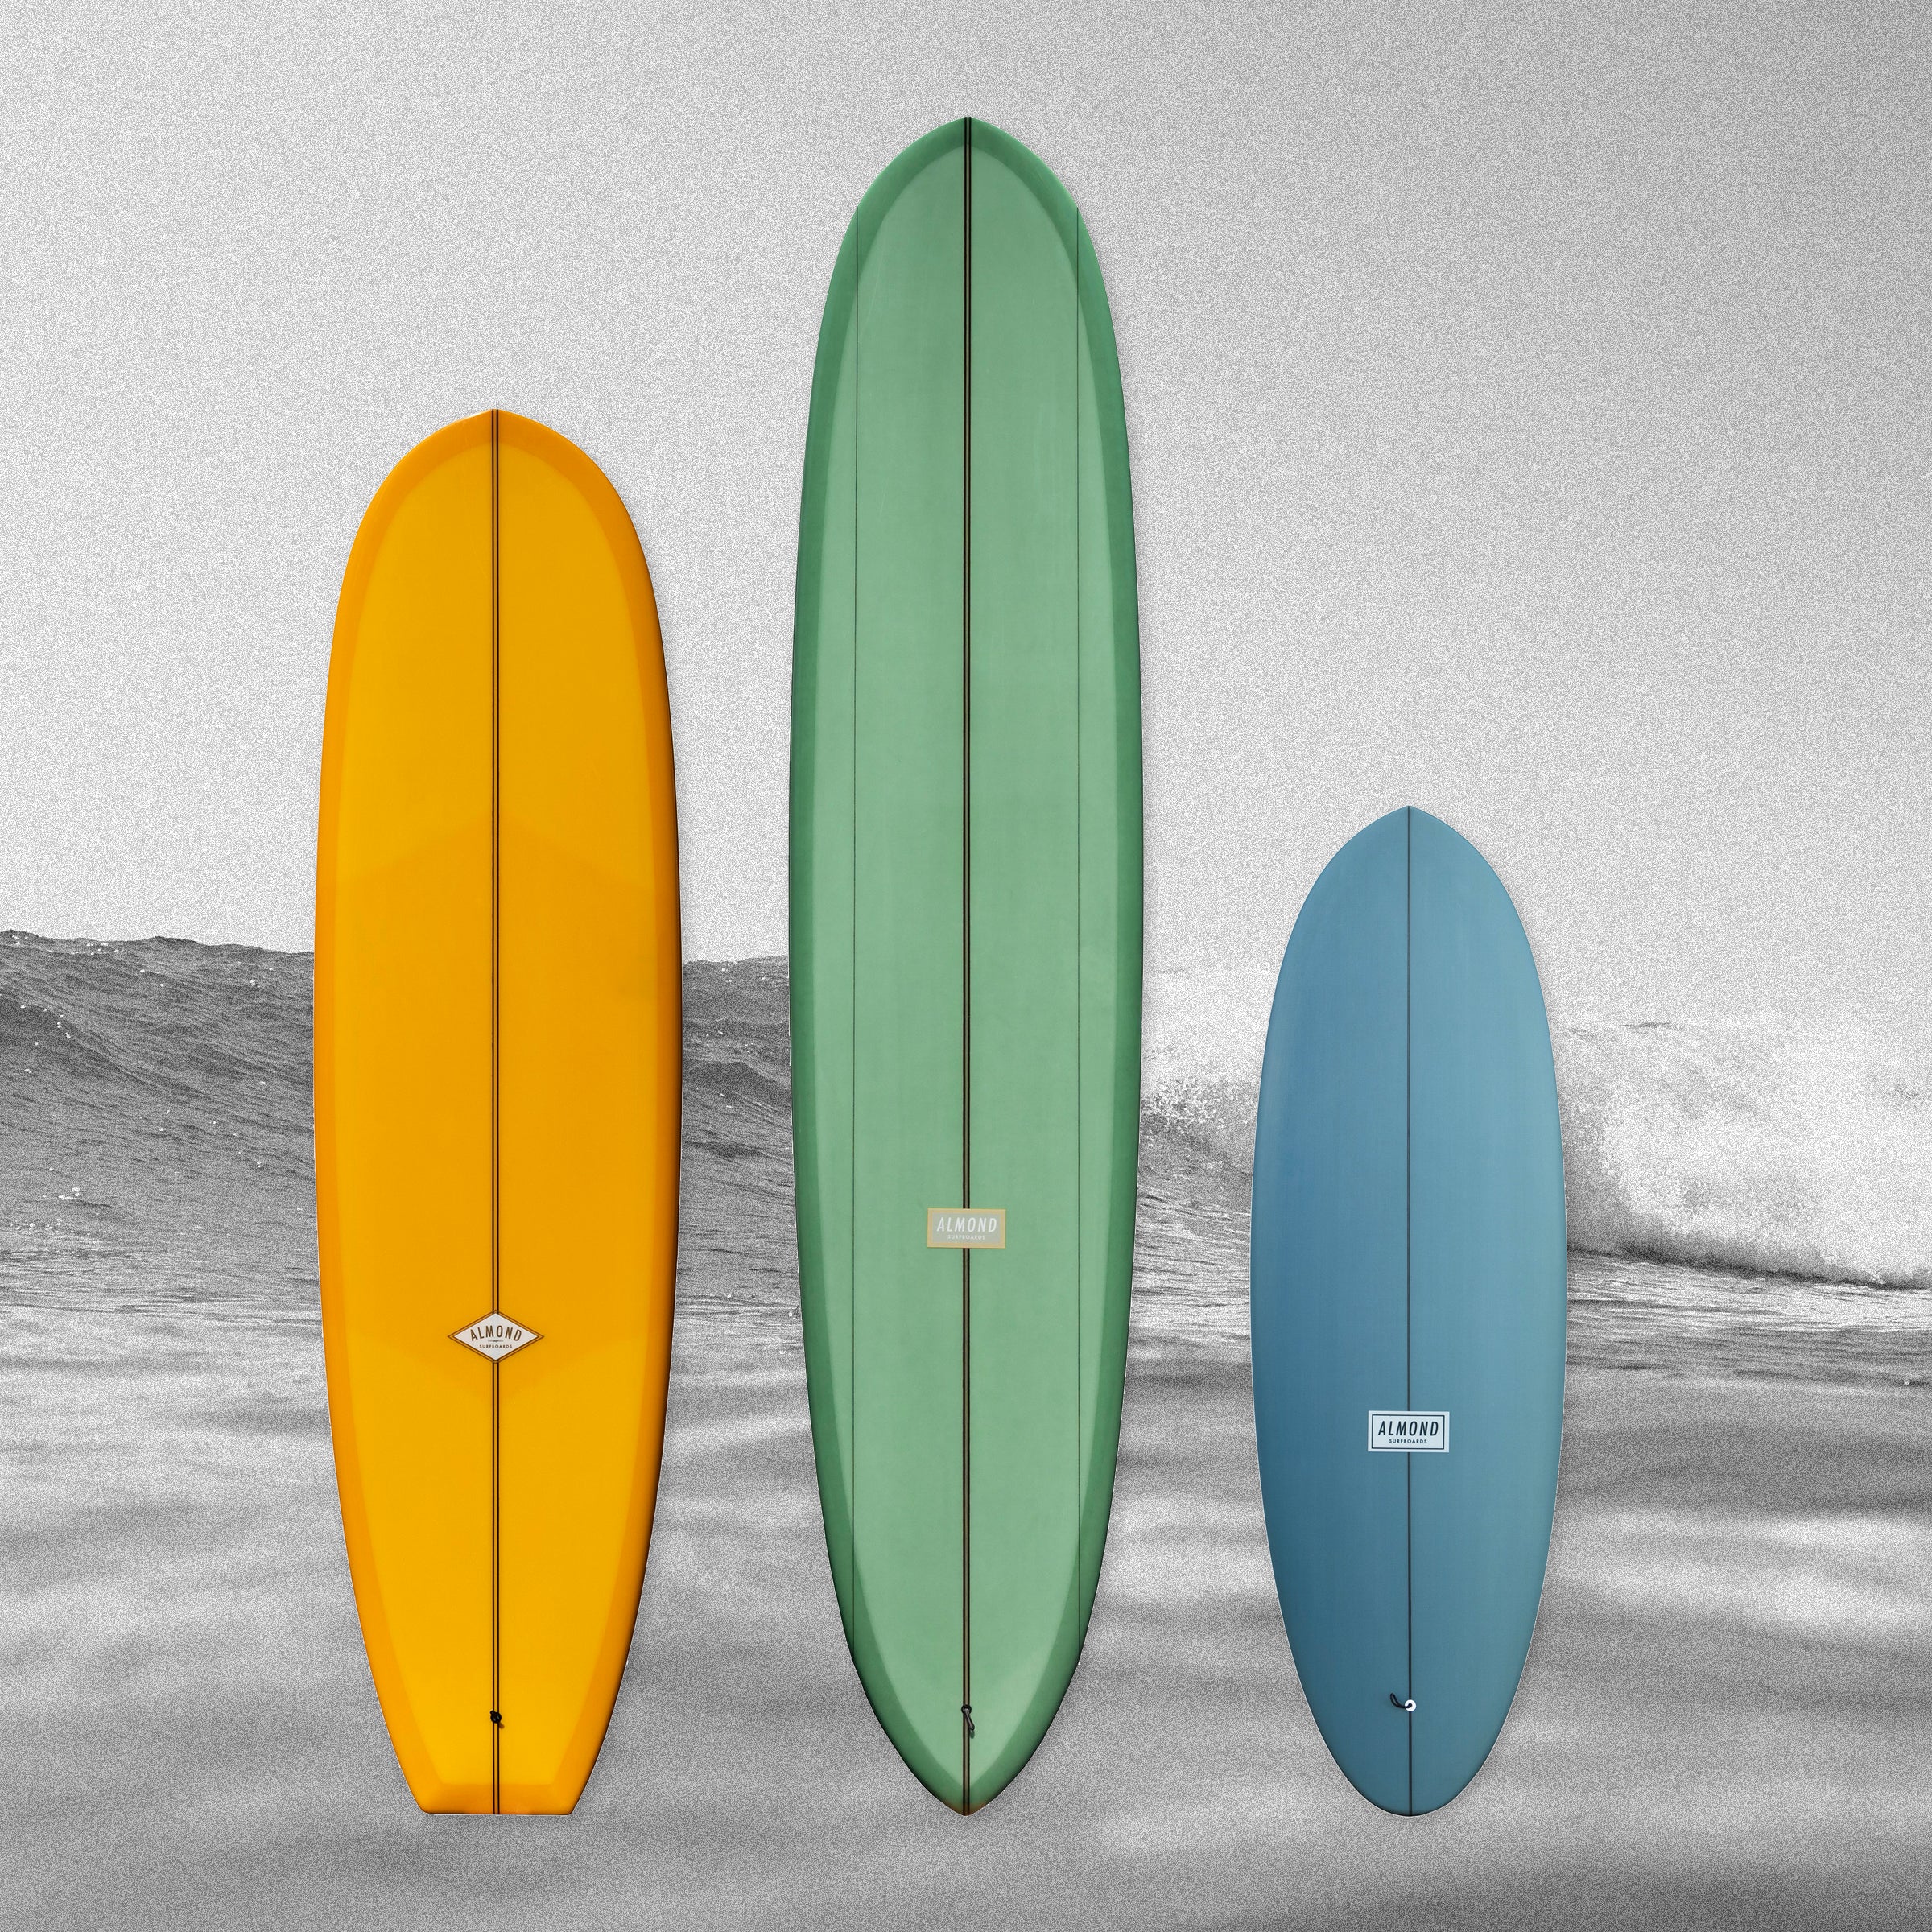 Introducing: Built to Order Surfboards